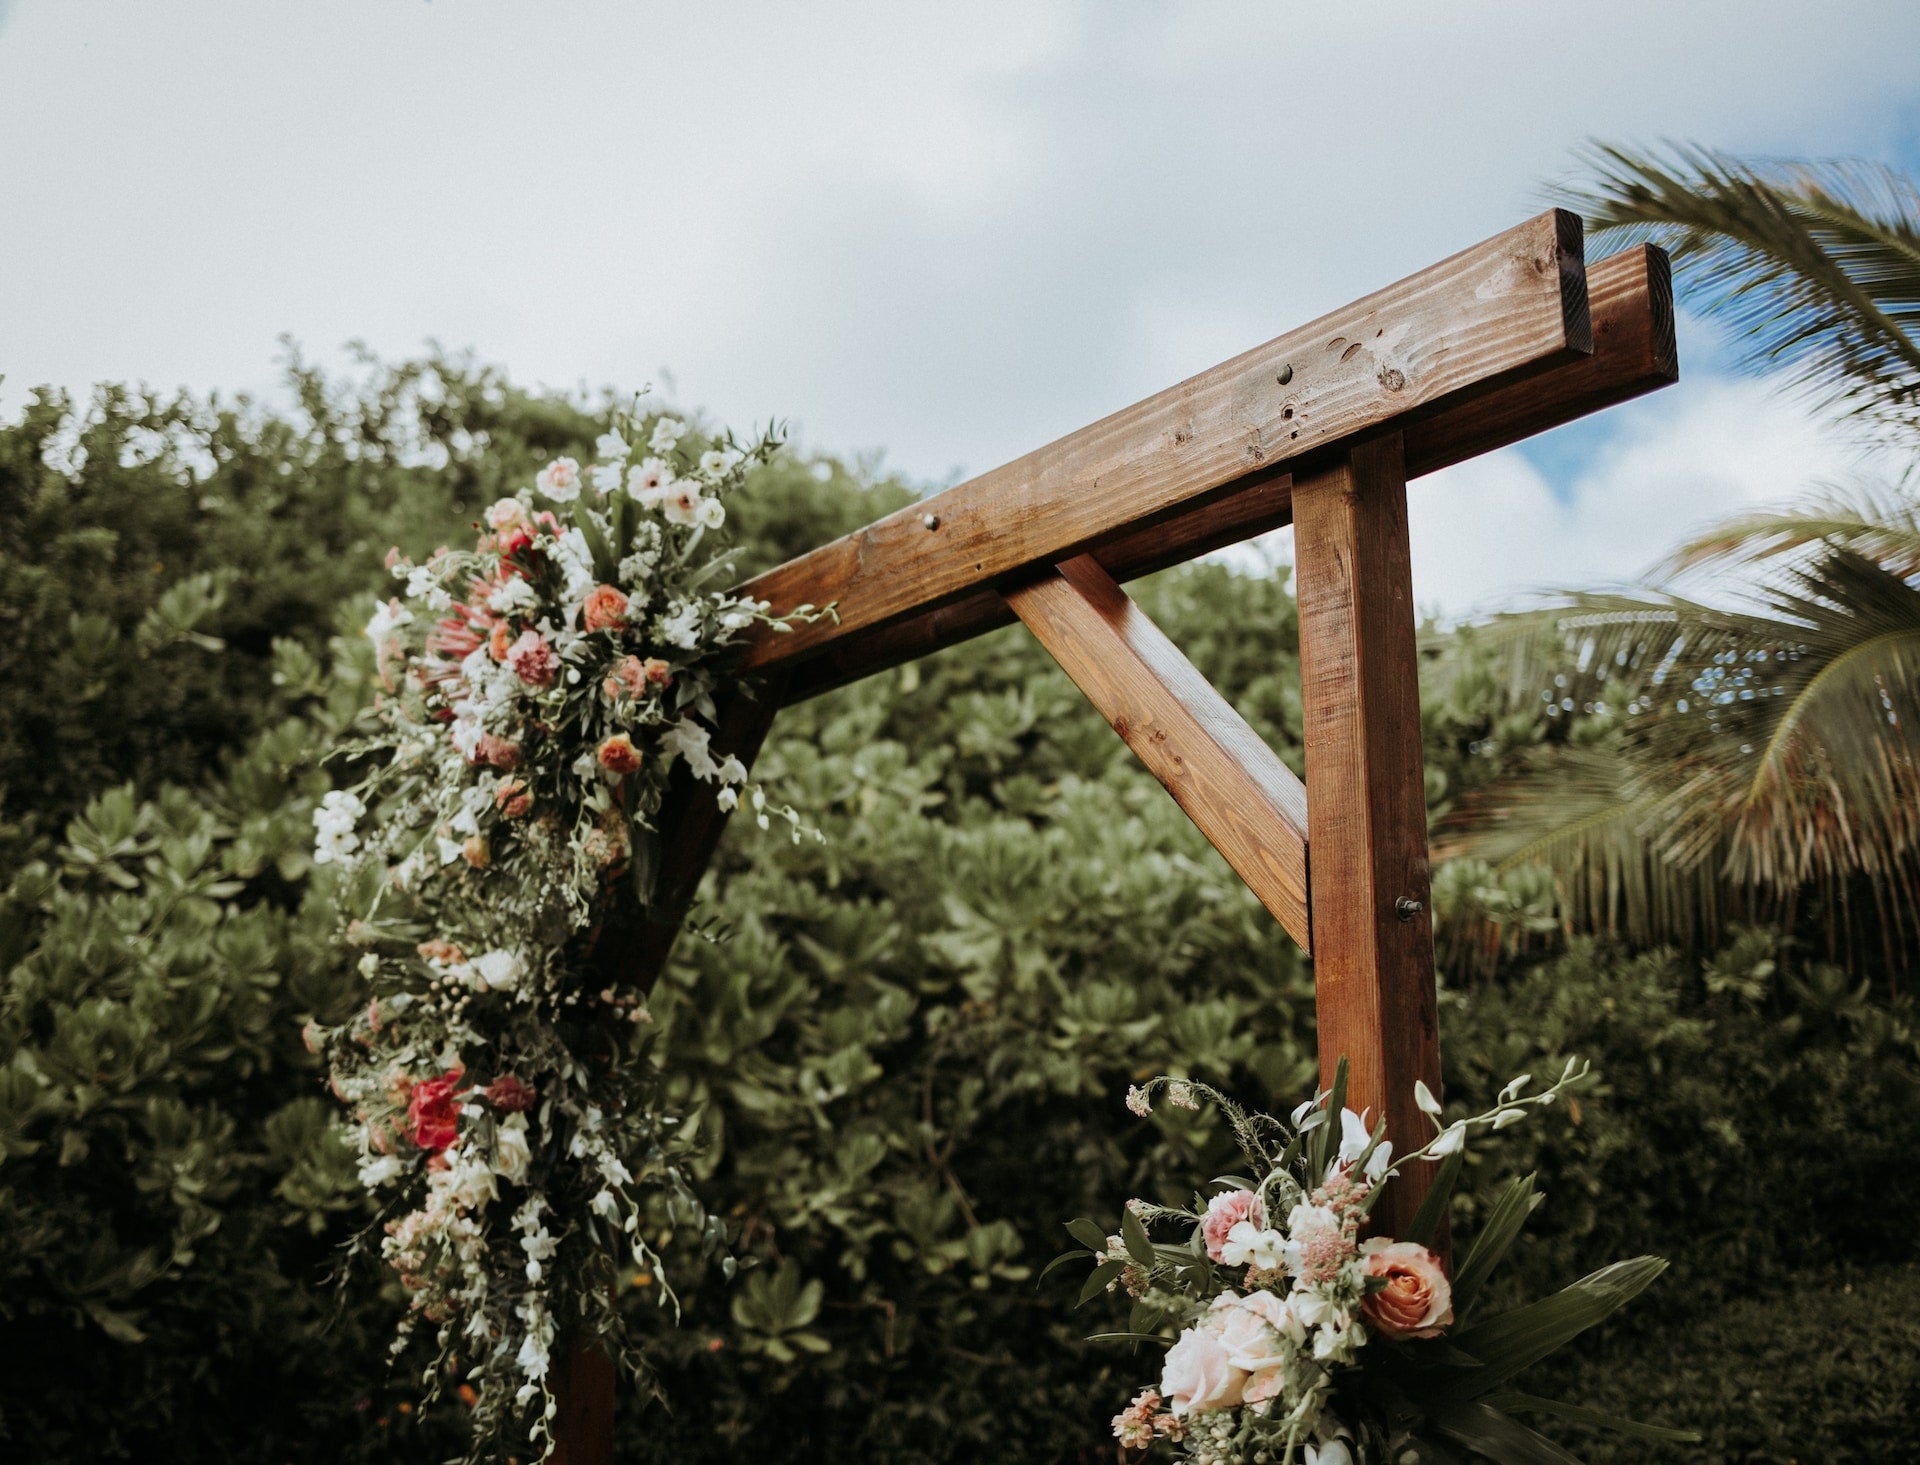 Wooden wedding arch with flowers